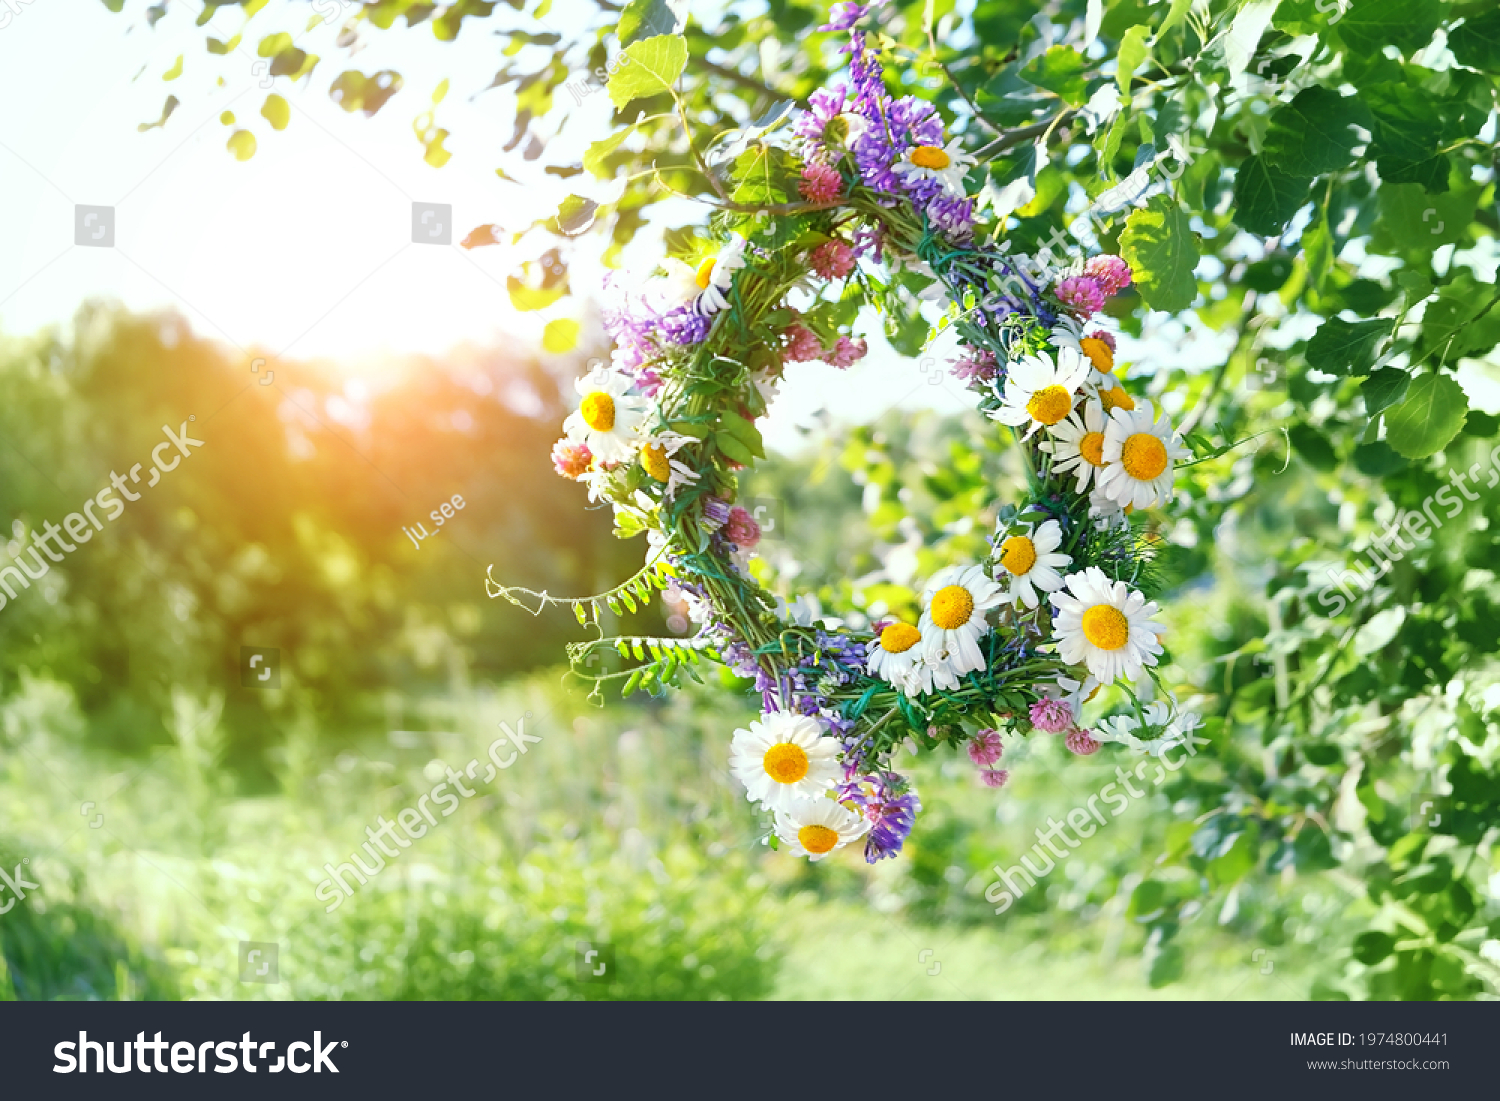 beautiful wreath of meadow flowers hanging on tree, natural sunny green background. floral decor, symbol of Summer Solstice Day, Midsummer. pagan witch traditions, wiccan ritual. Litha sabbat. #1974800441